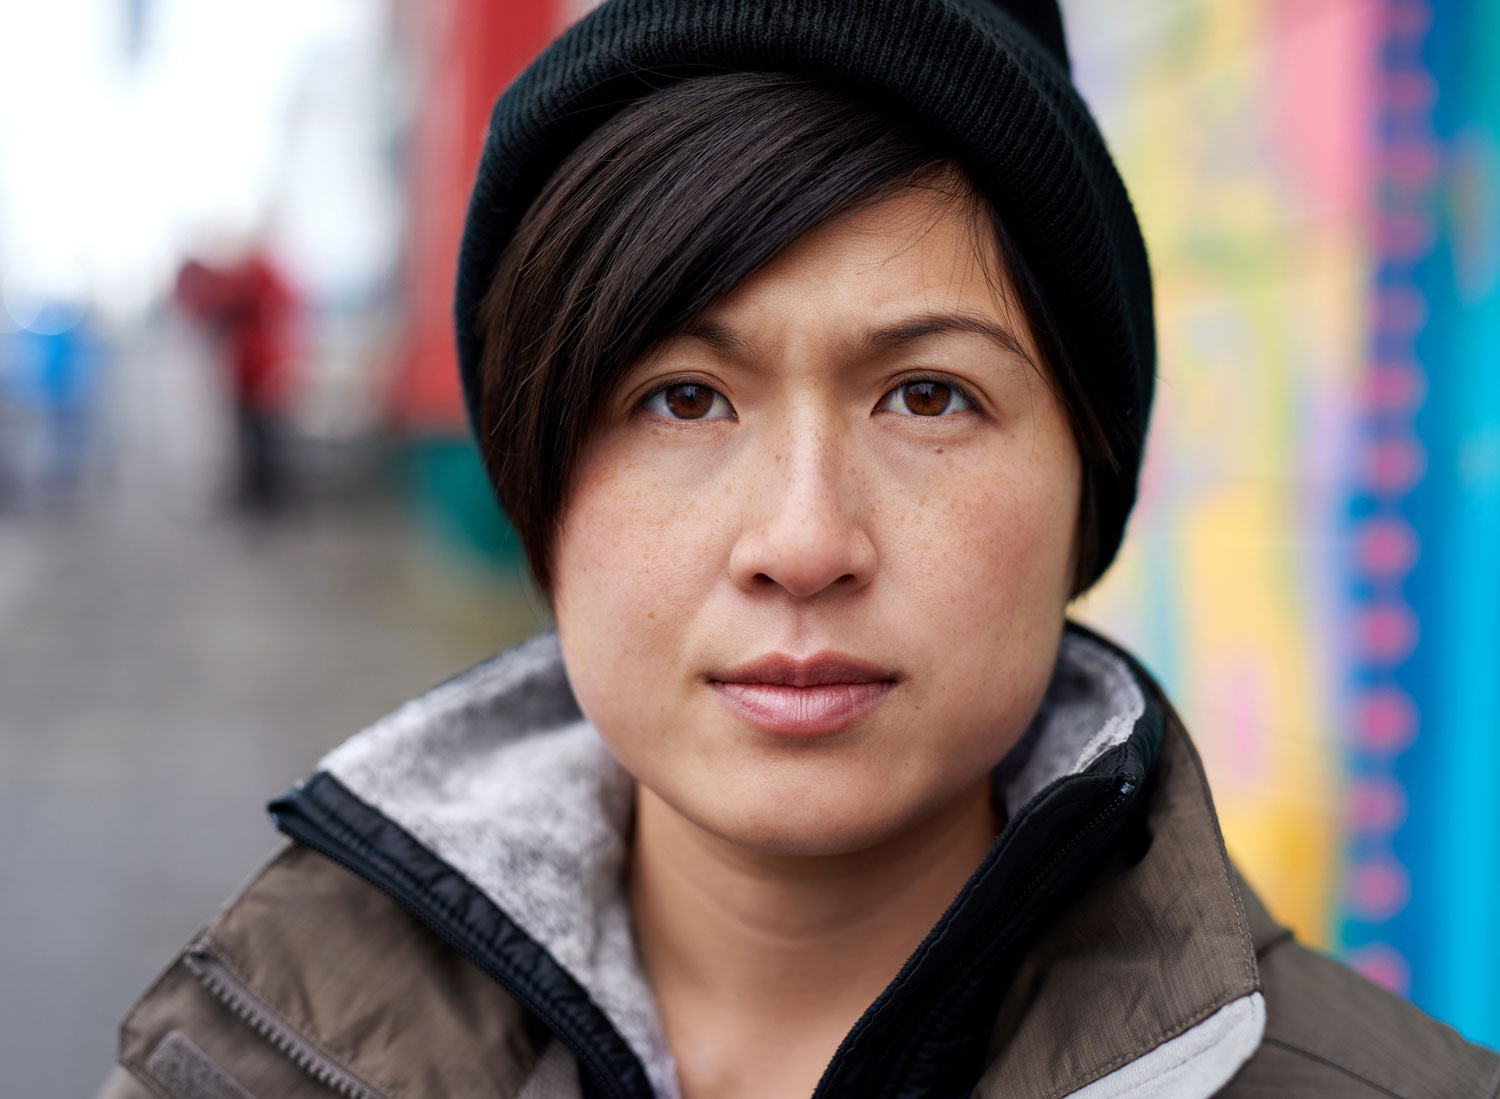 Asian woman with stocking cap looks directly at camera with defiant expression